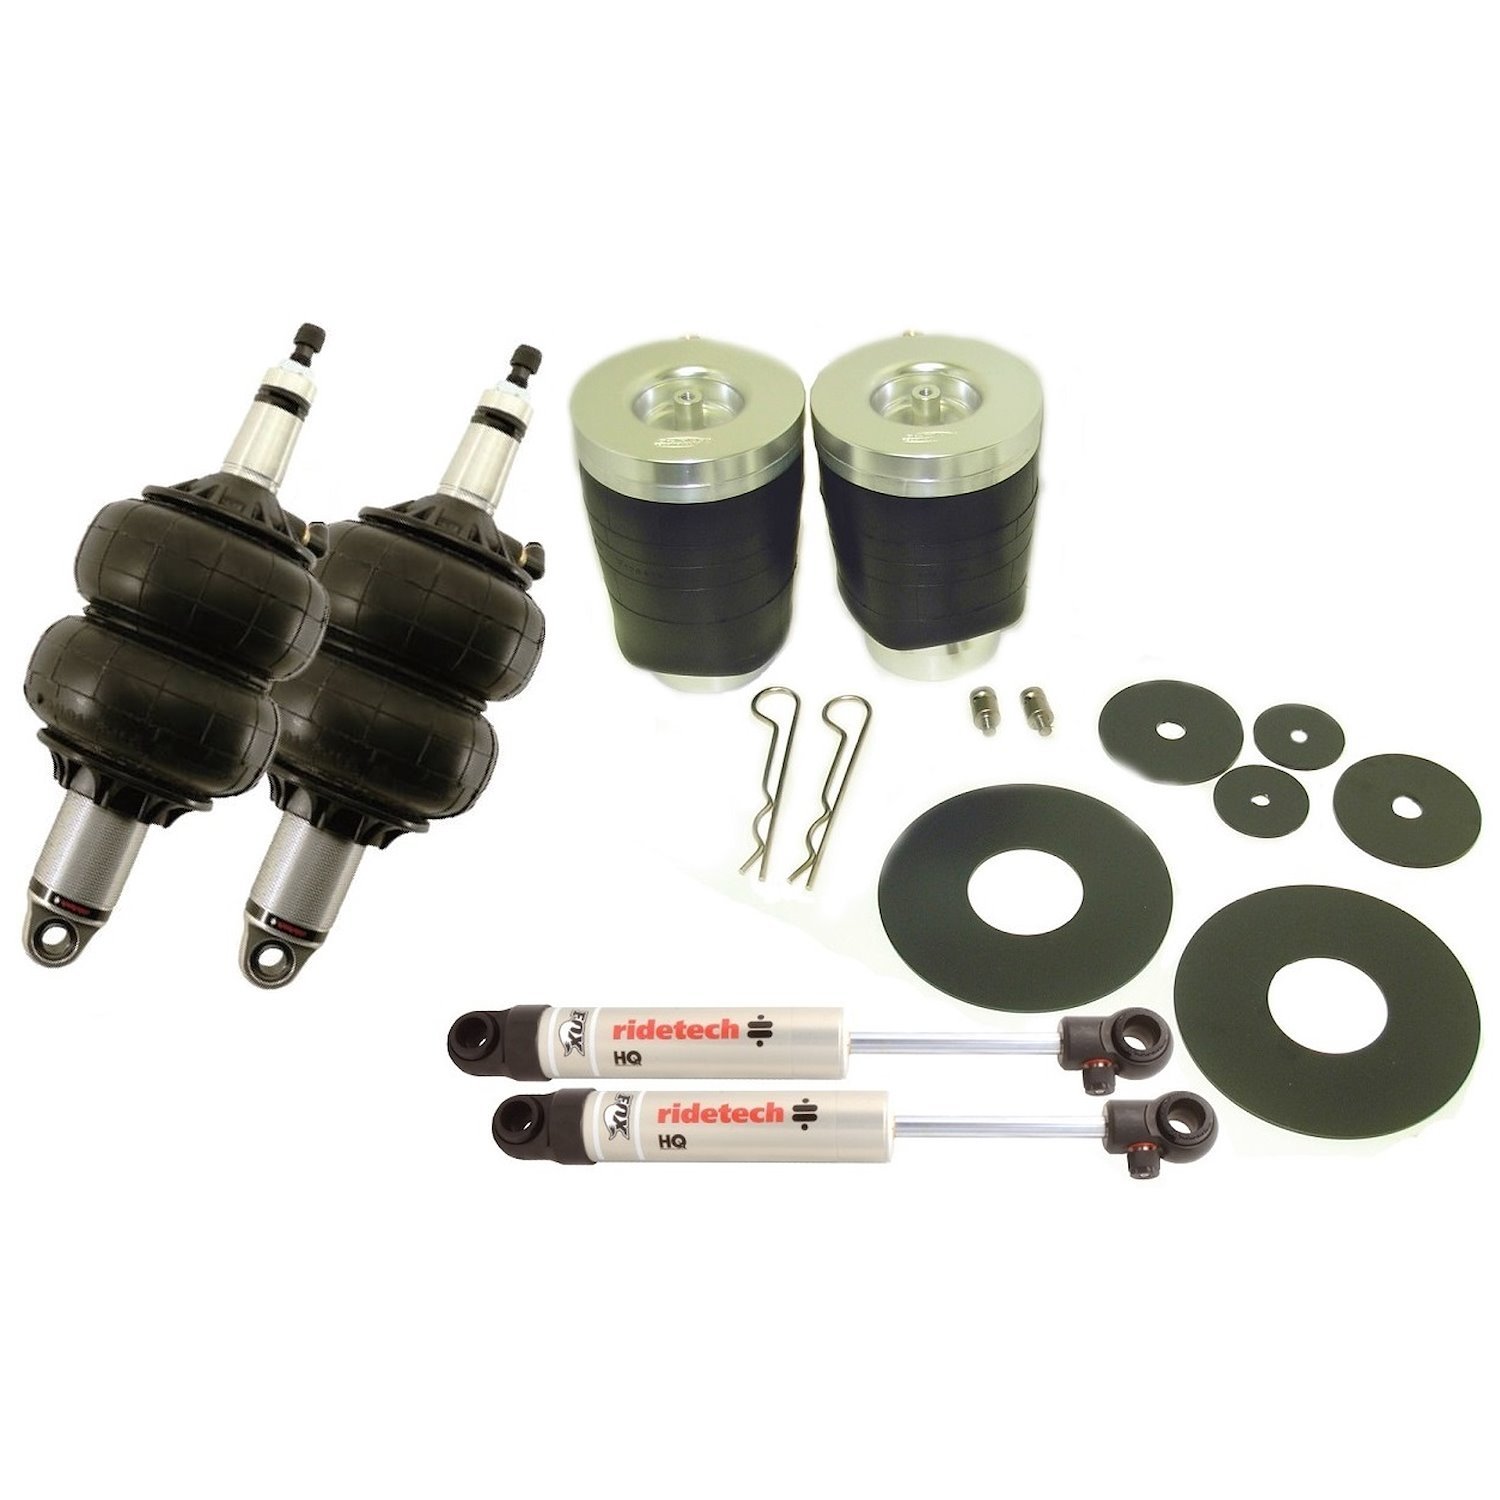 Complete Suspension System for 1965-1970 Cadillac